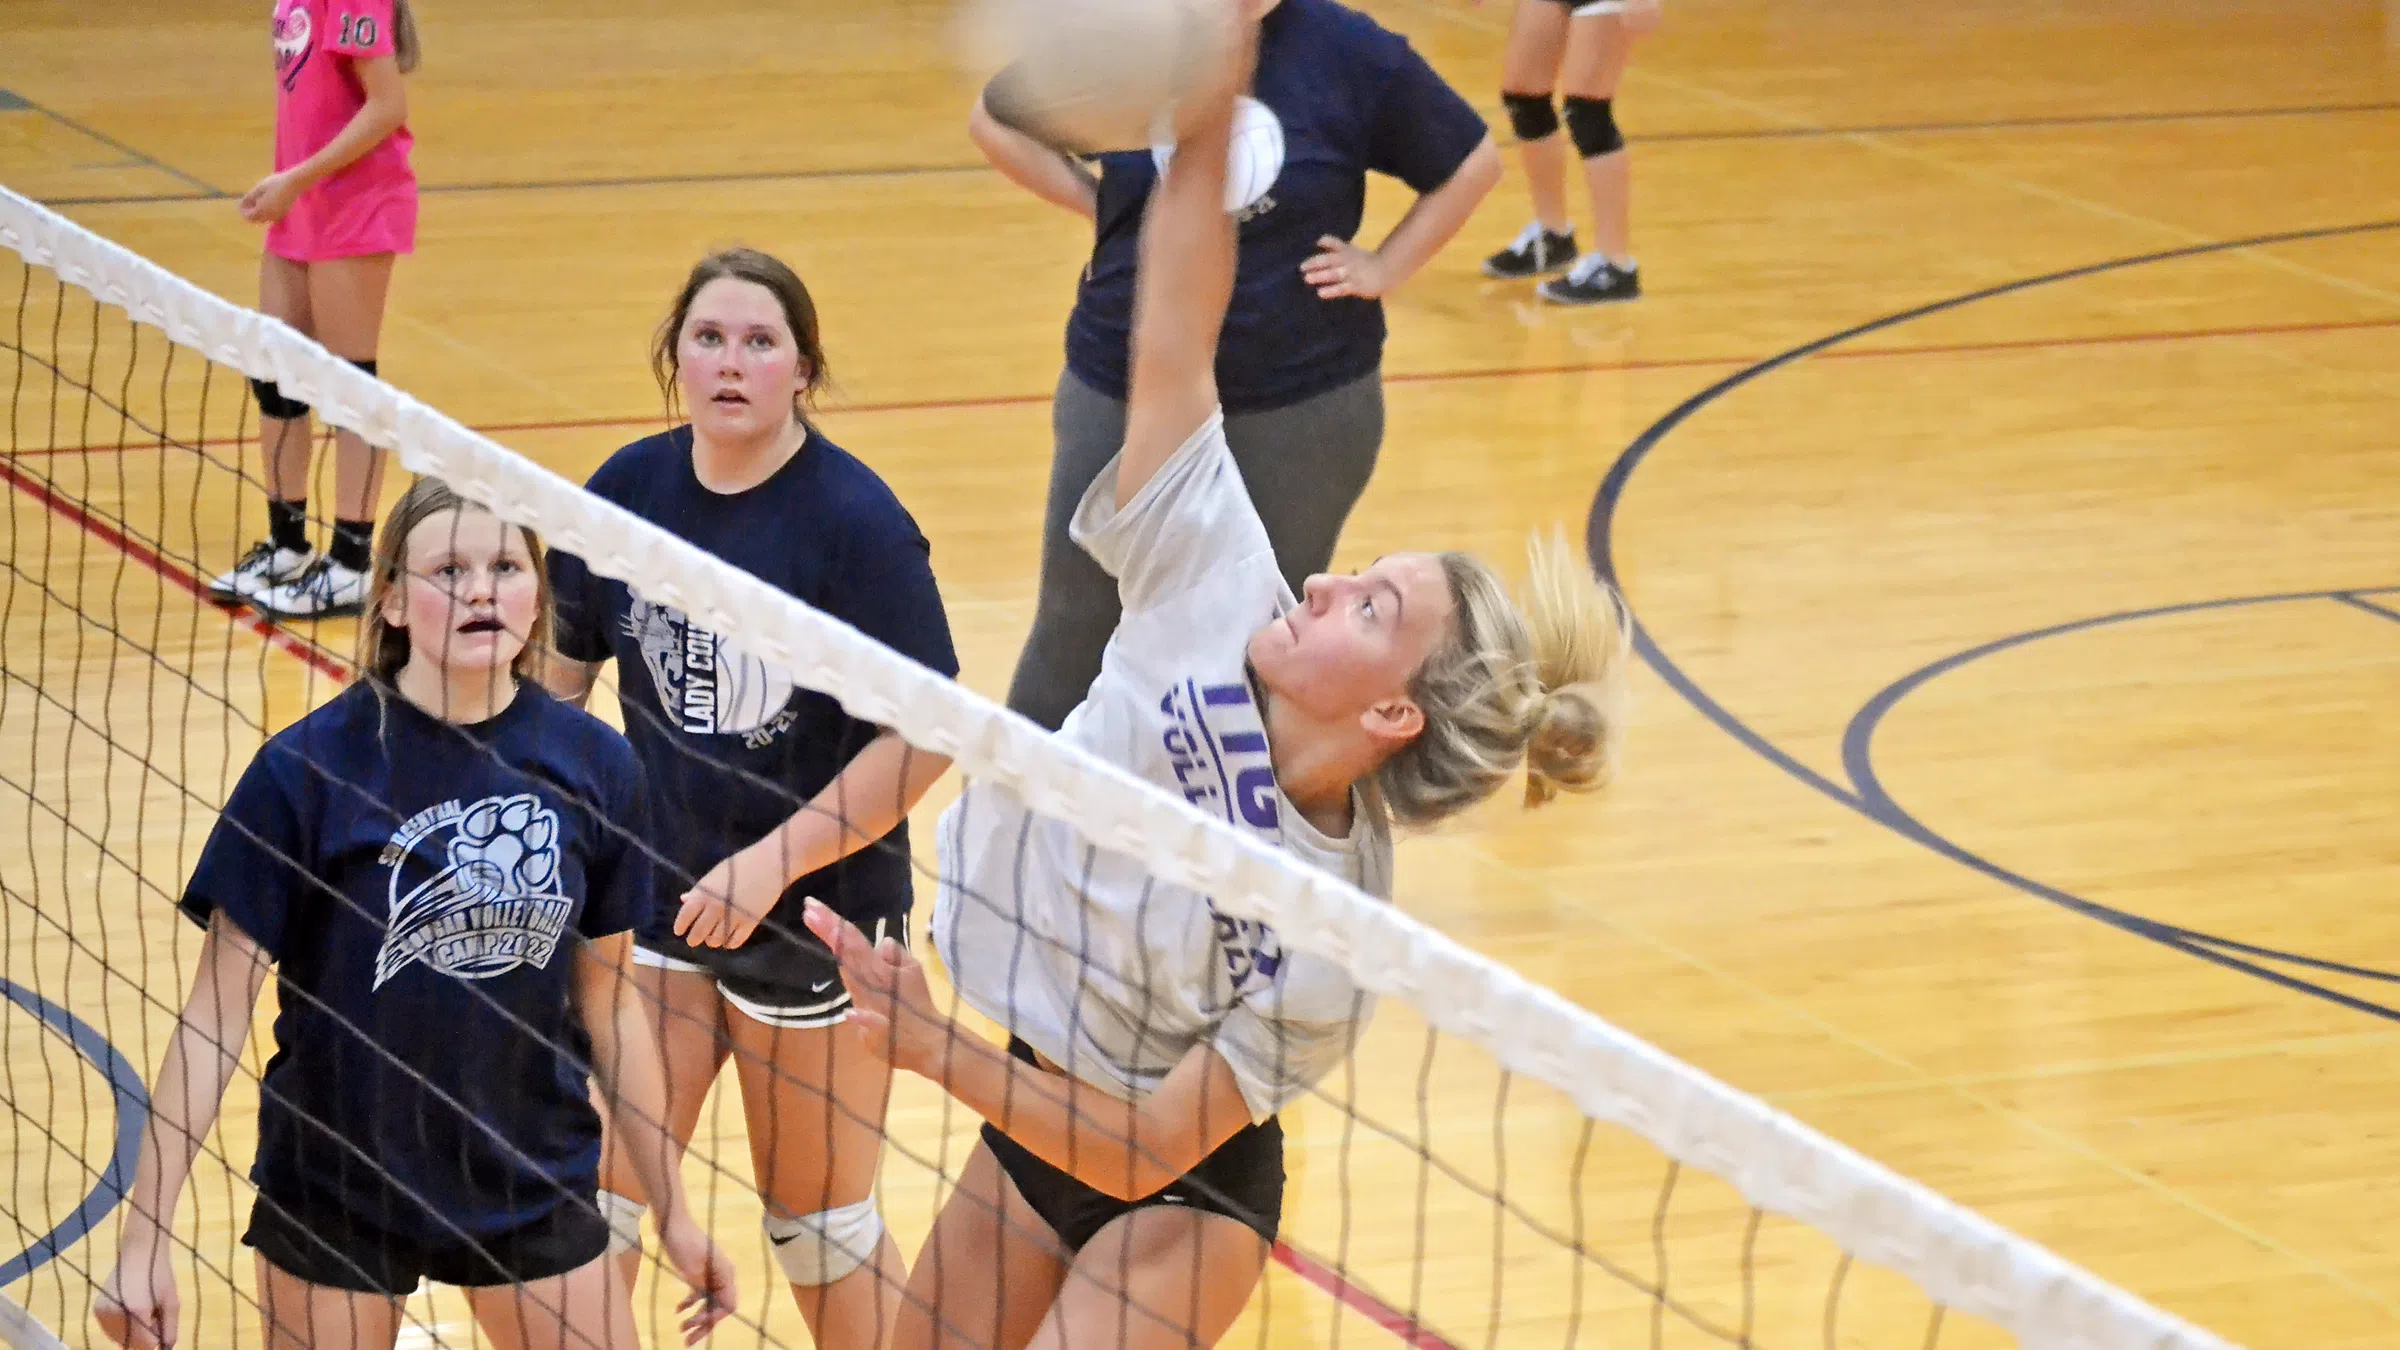 South Central Volleyball getting their season started | I70Sports